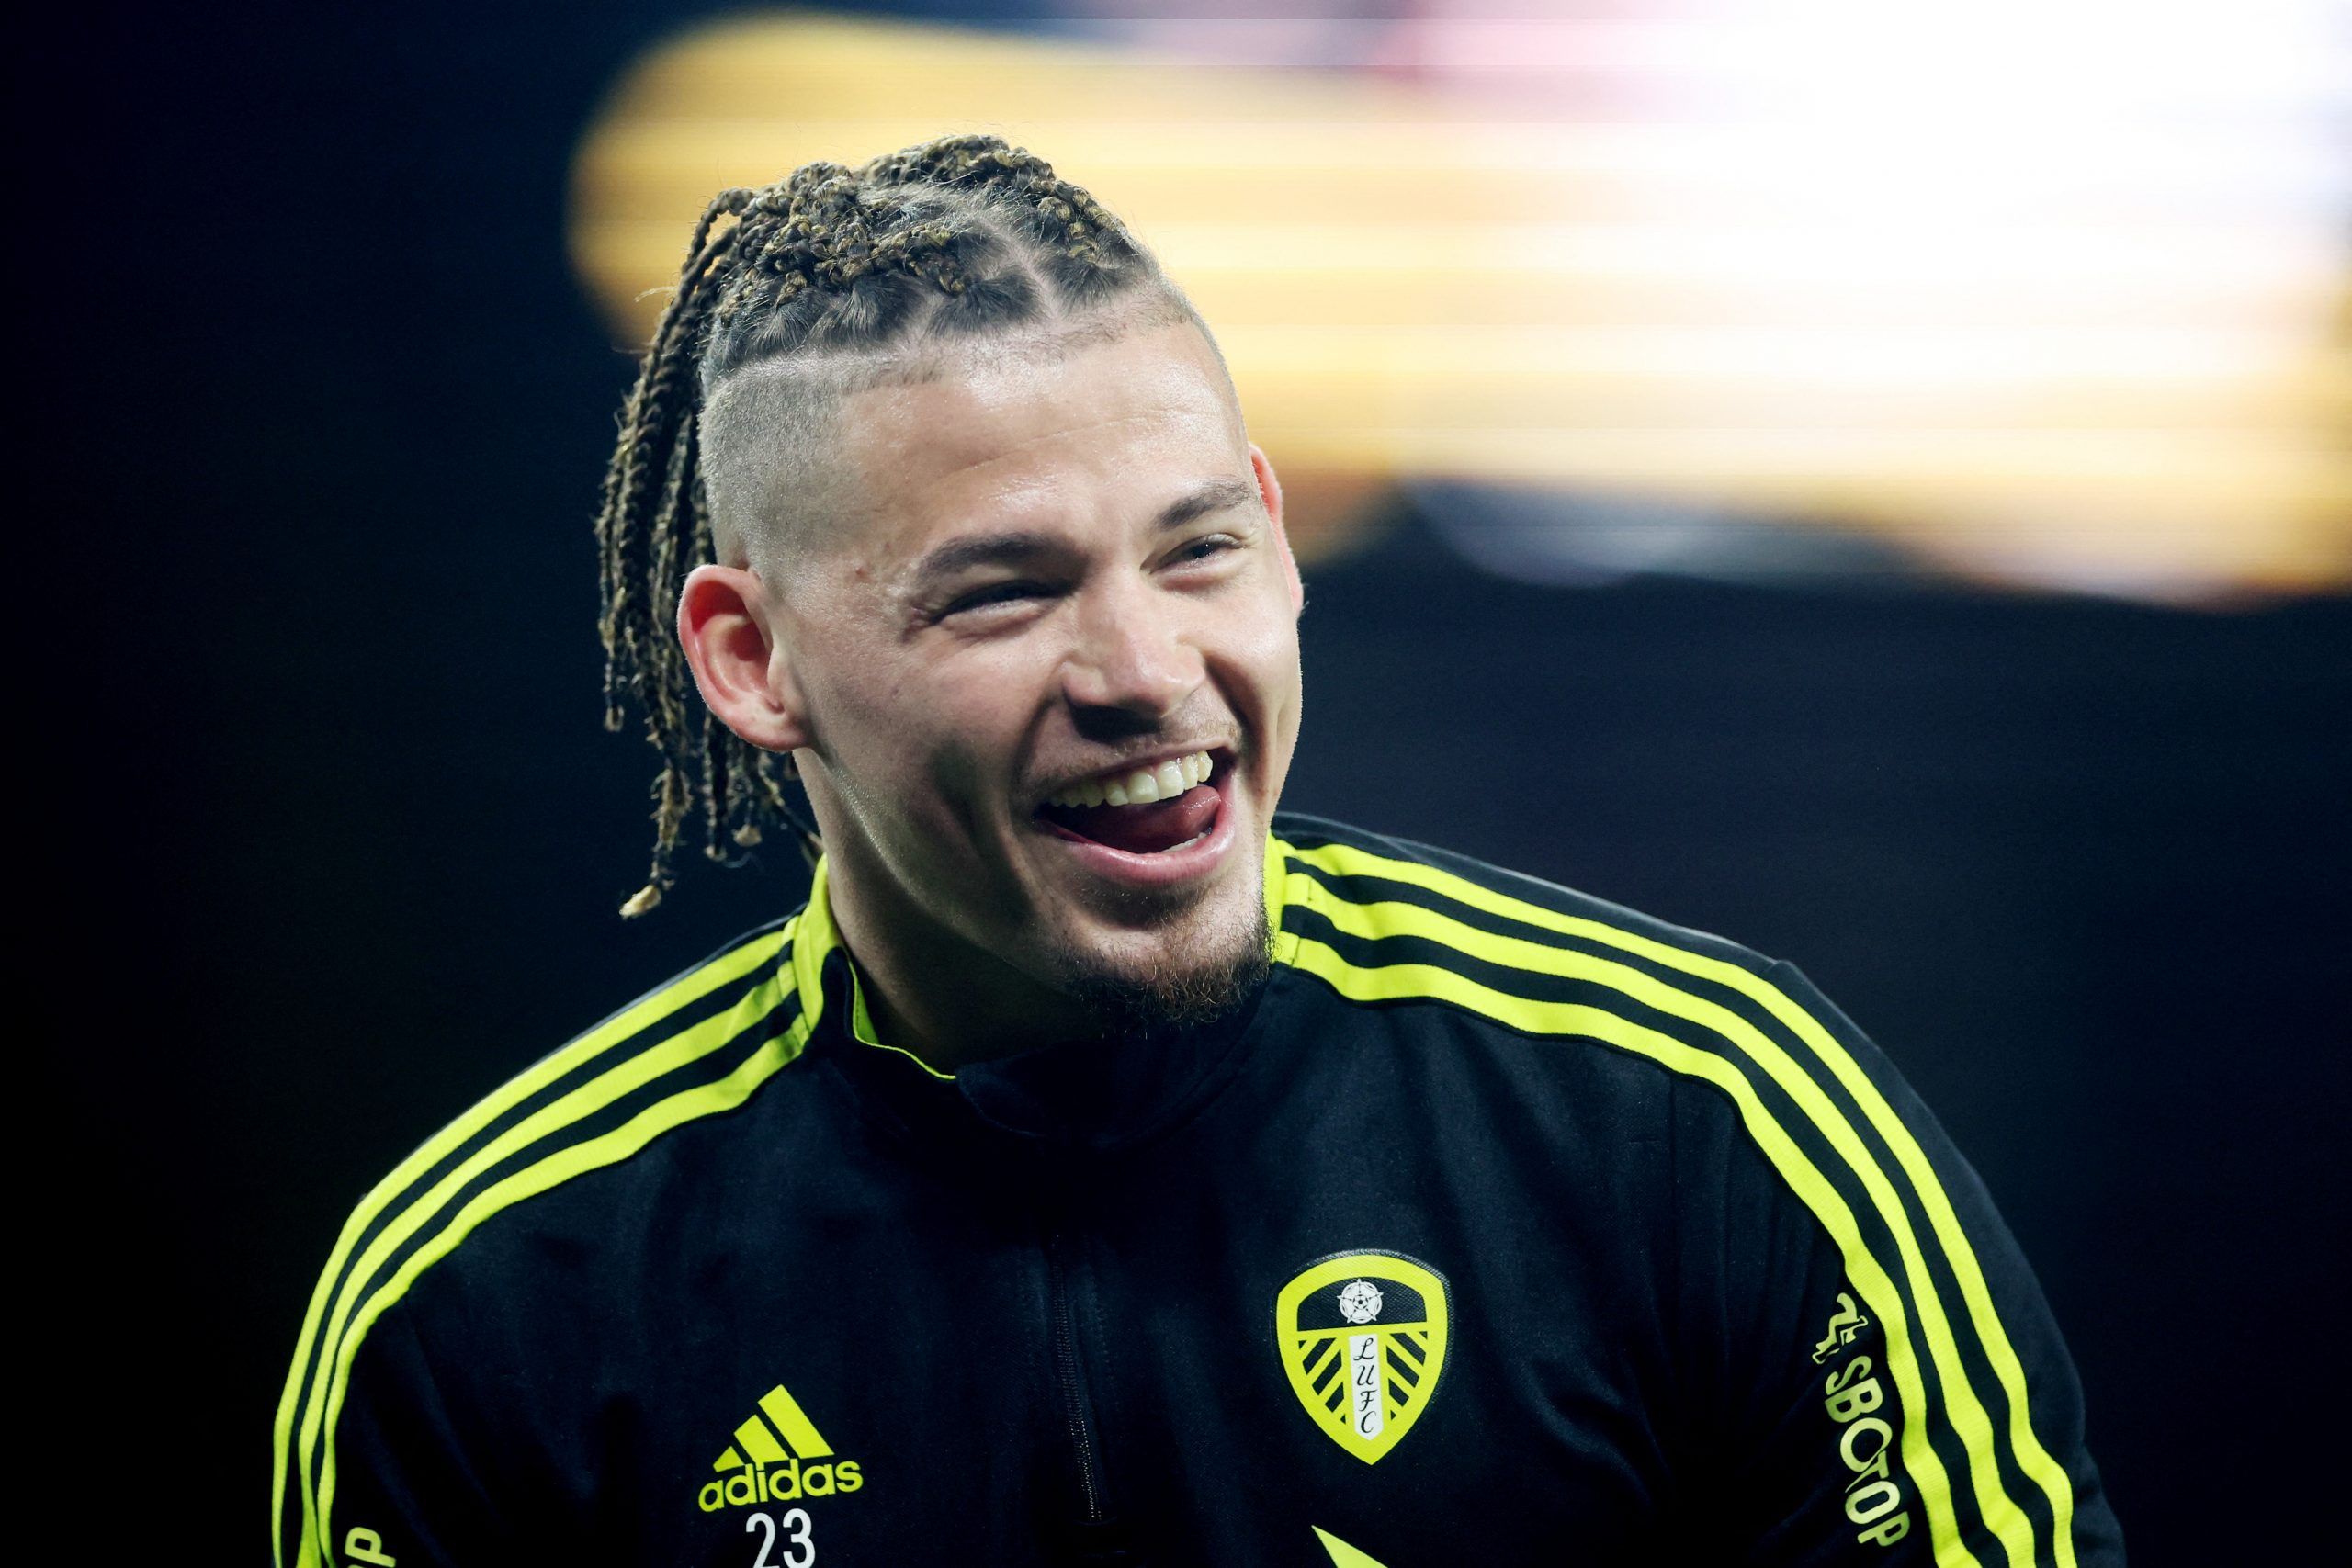 Soccer Football - Premier League - Wolverhampton Wanderers v Leeds United - Molineux Stadium, Wolverhampton, Britain - March 18, 2022 Leeds United's Kalvin Phillips during the warm up before the match Action Images via Reuters/Paul Childs EDITORIAL USE ONLY. No use with unauthorized audio, video, data, fixture lists, club/league logos or 'live' services. Online in-match use limited to 75 images, no video emulation. No use in betting, games or single club /league/player publications.  Please cont